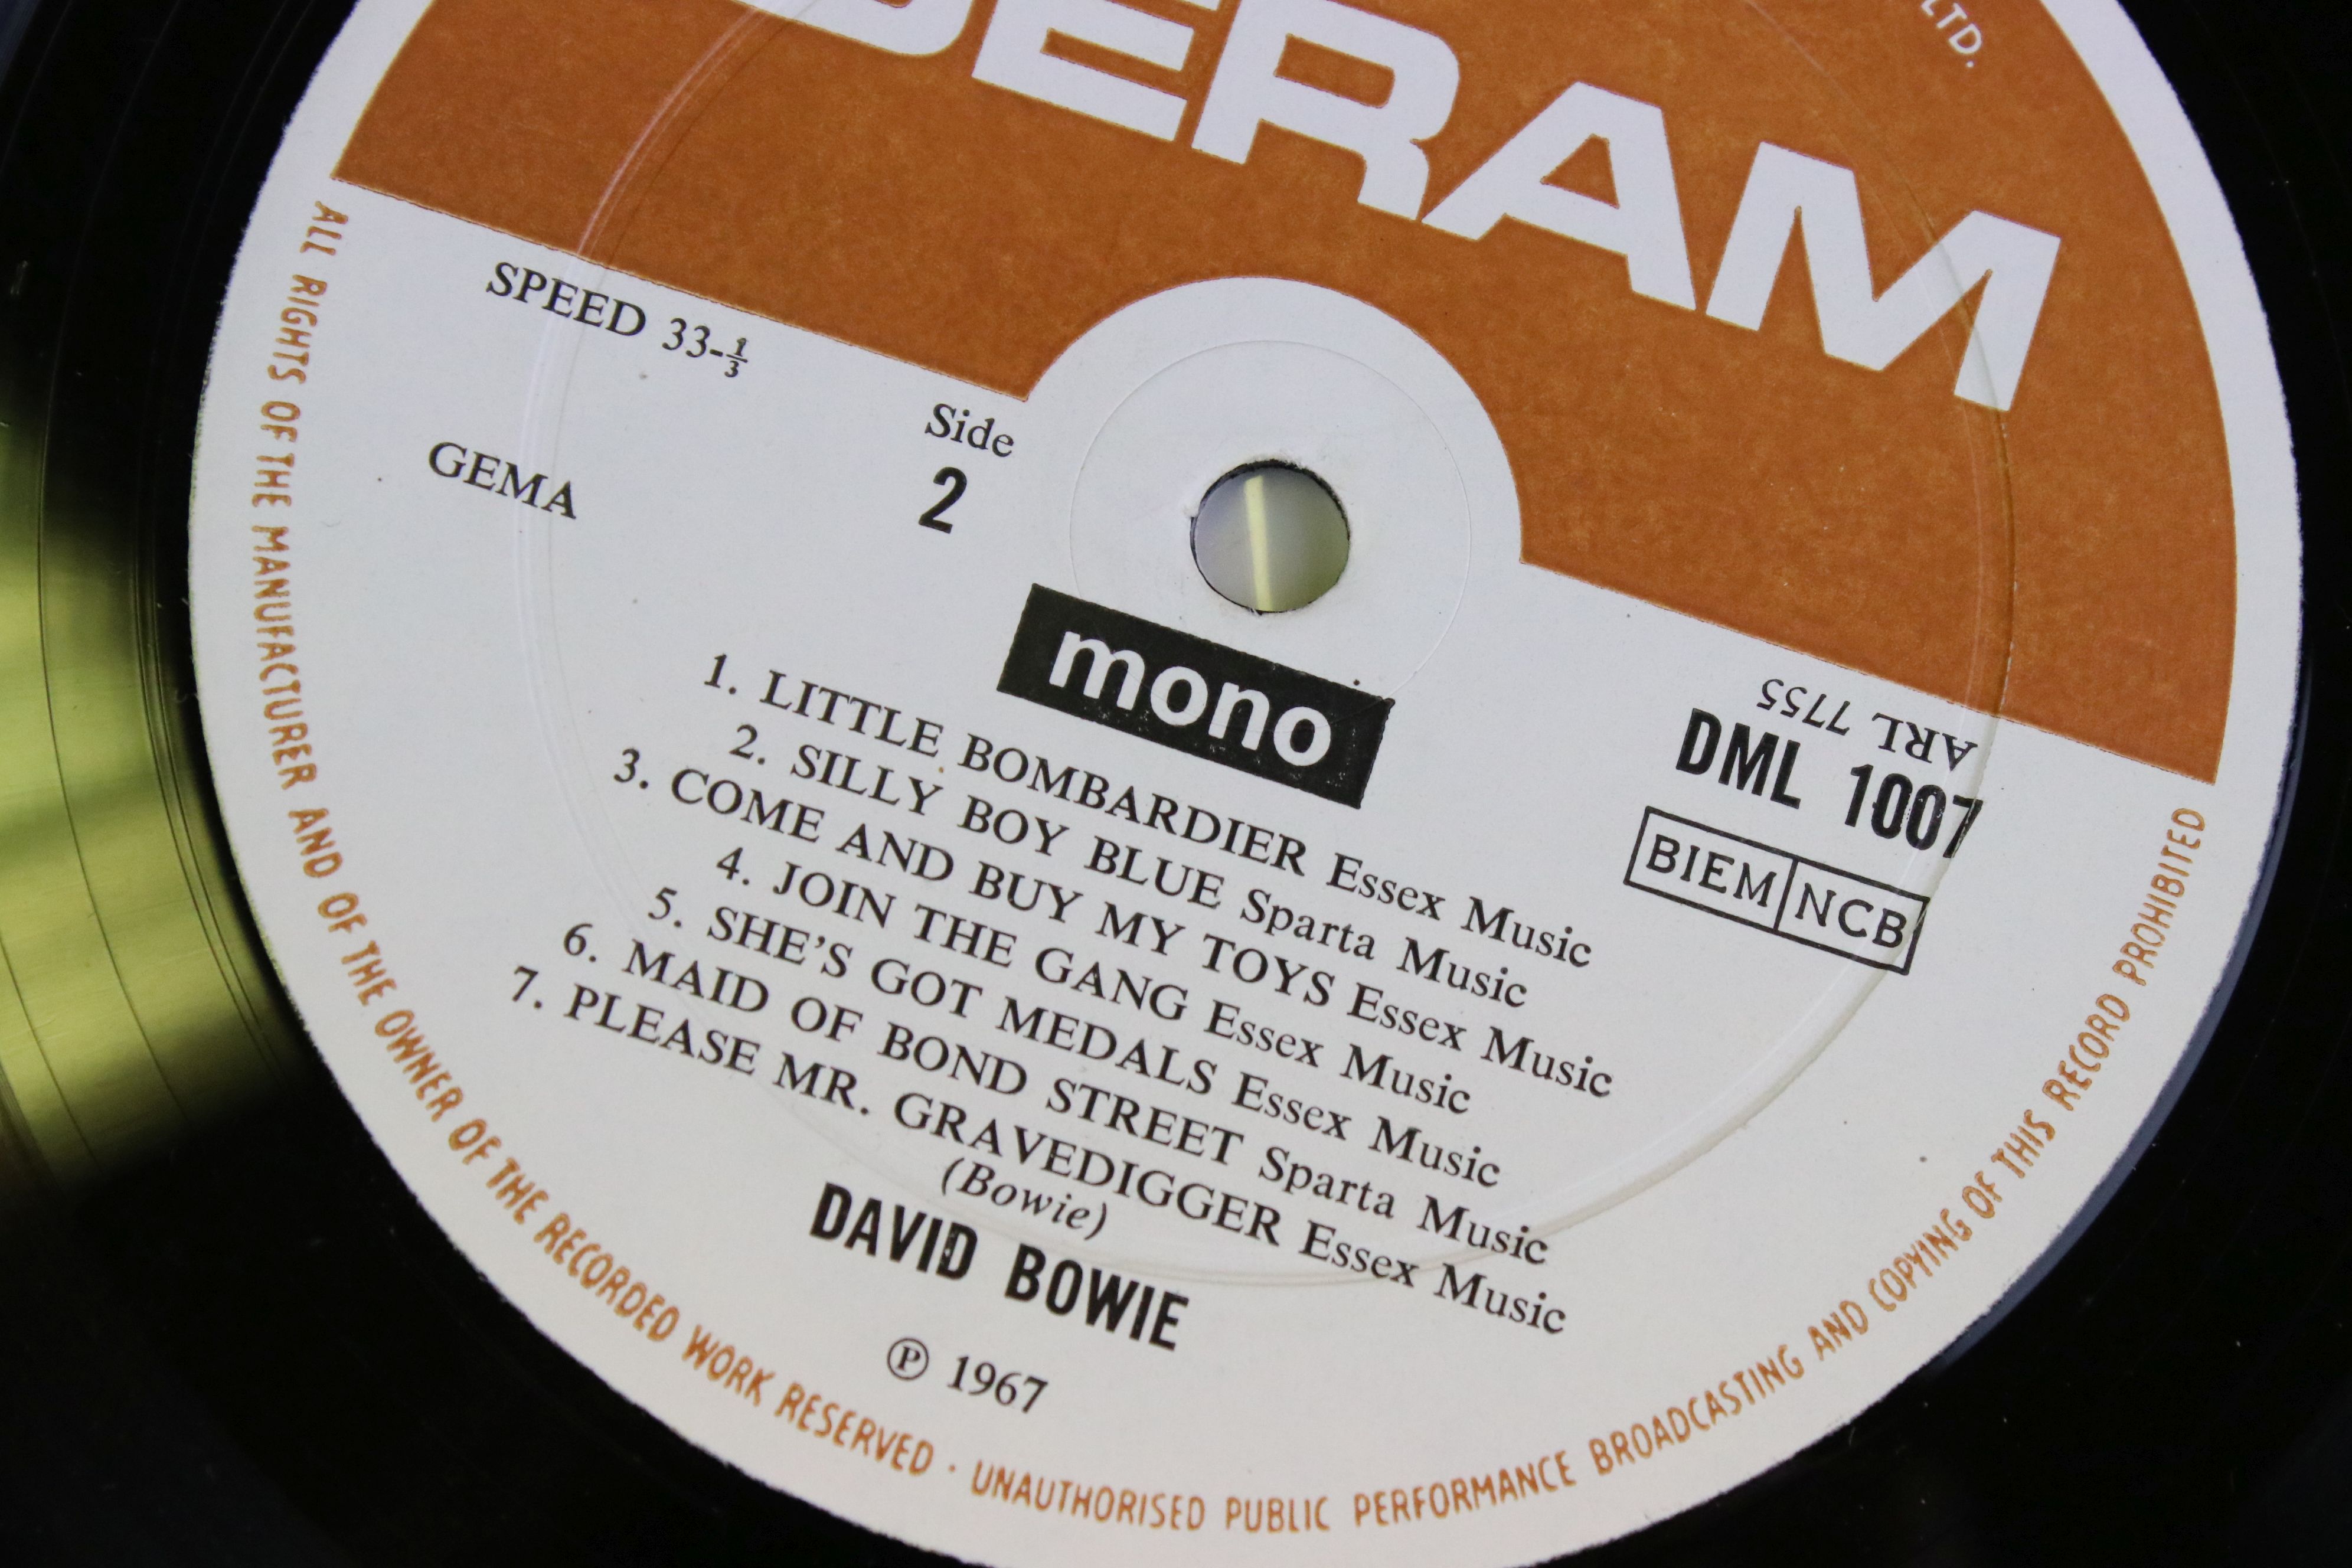 Vinyl - David Bowie Self Titled on Deram (DML 1007) mono, laminated front cover. Matrices 7754 1B - Image 4 of 6